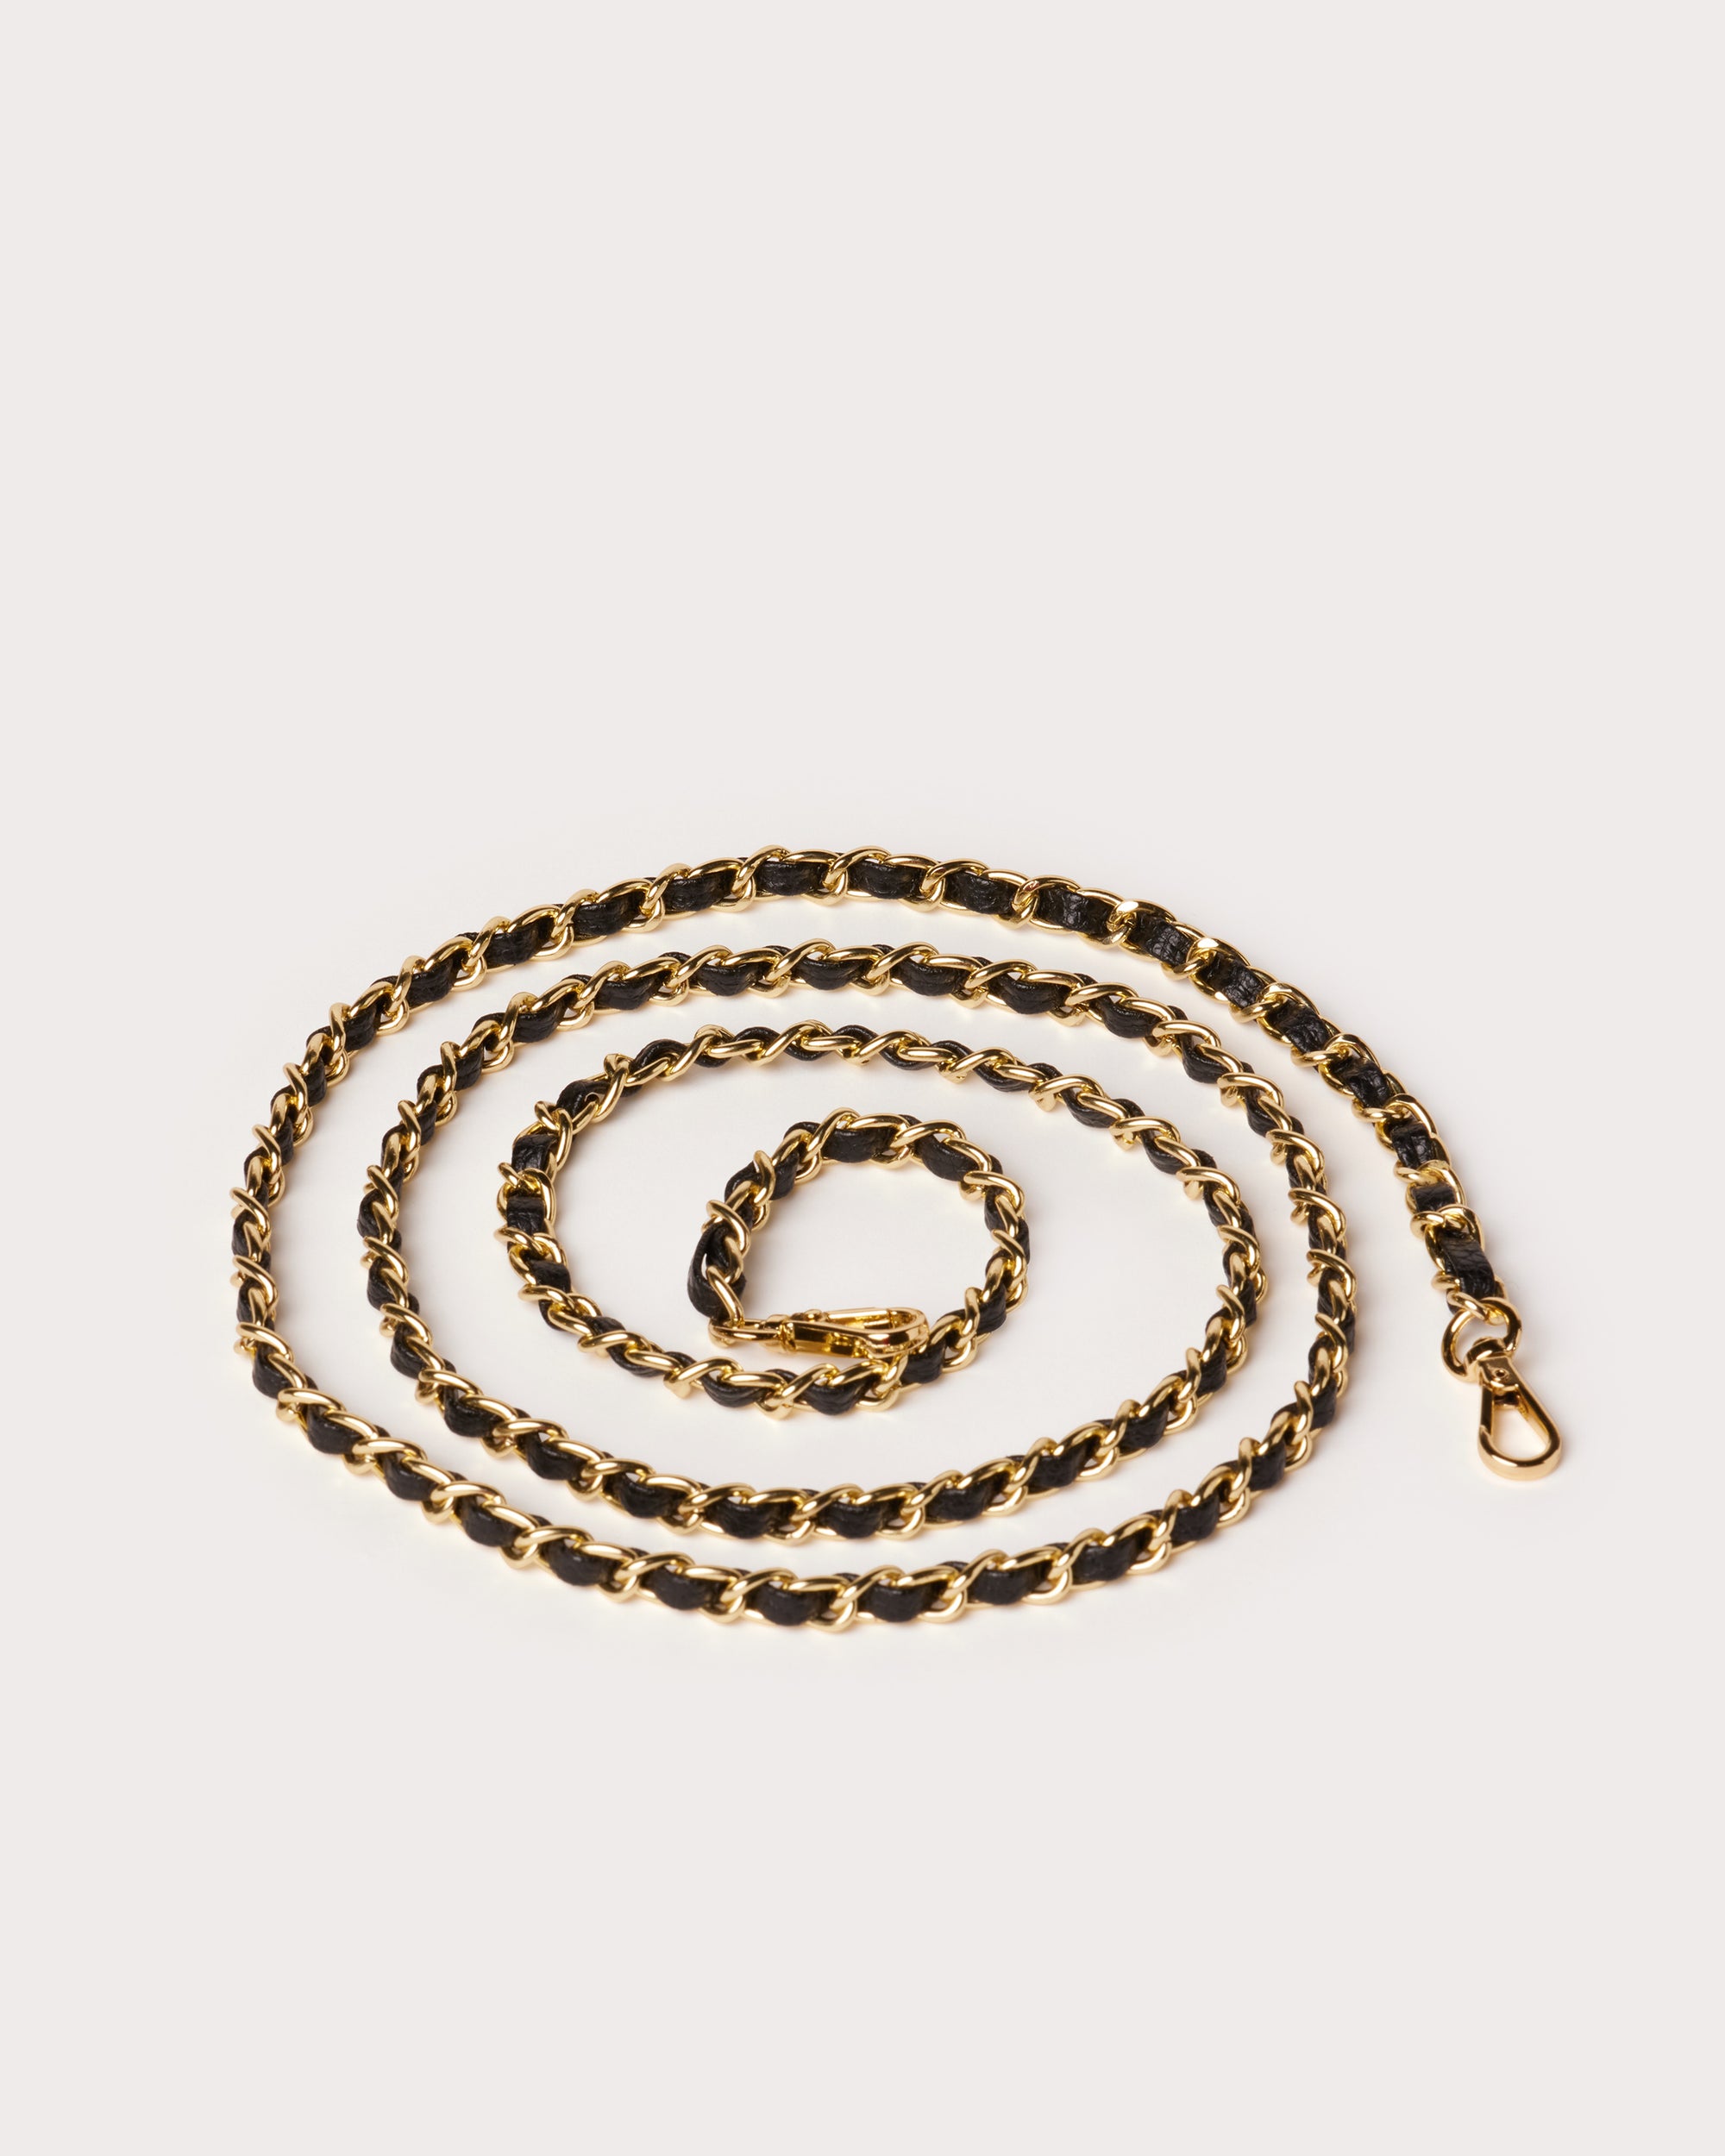 Ultra Luxe Leather-woven Gold Chain Strap w/ Leather Shoulder